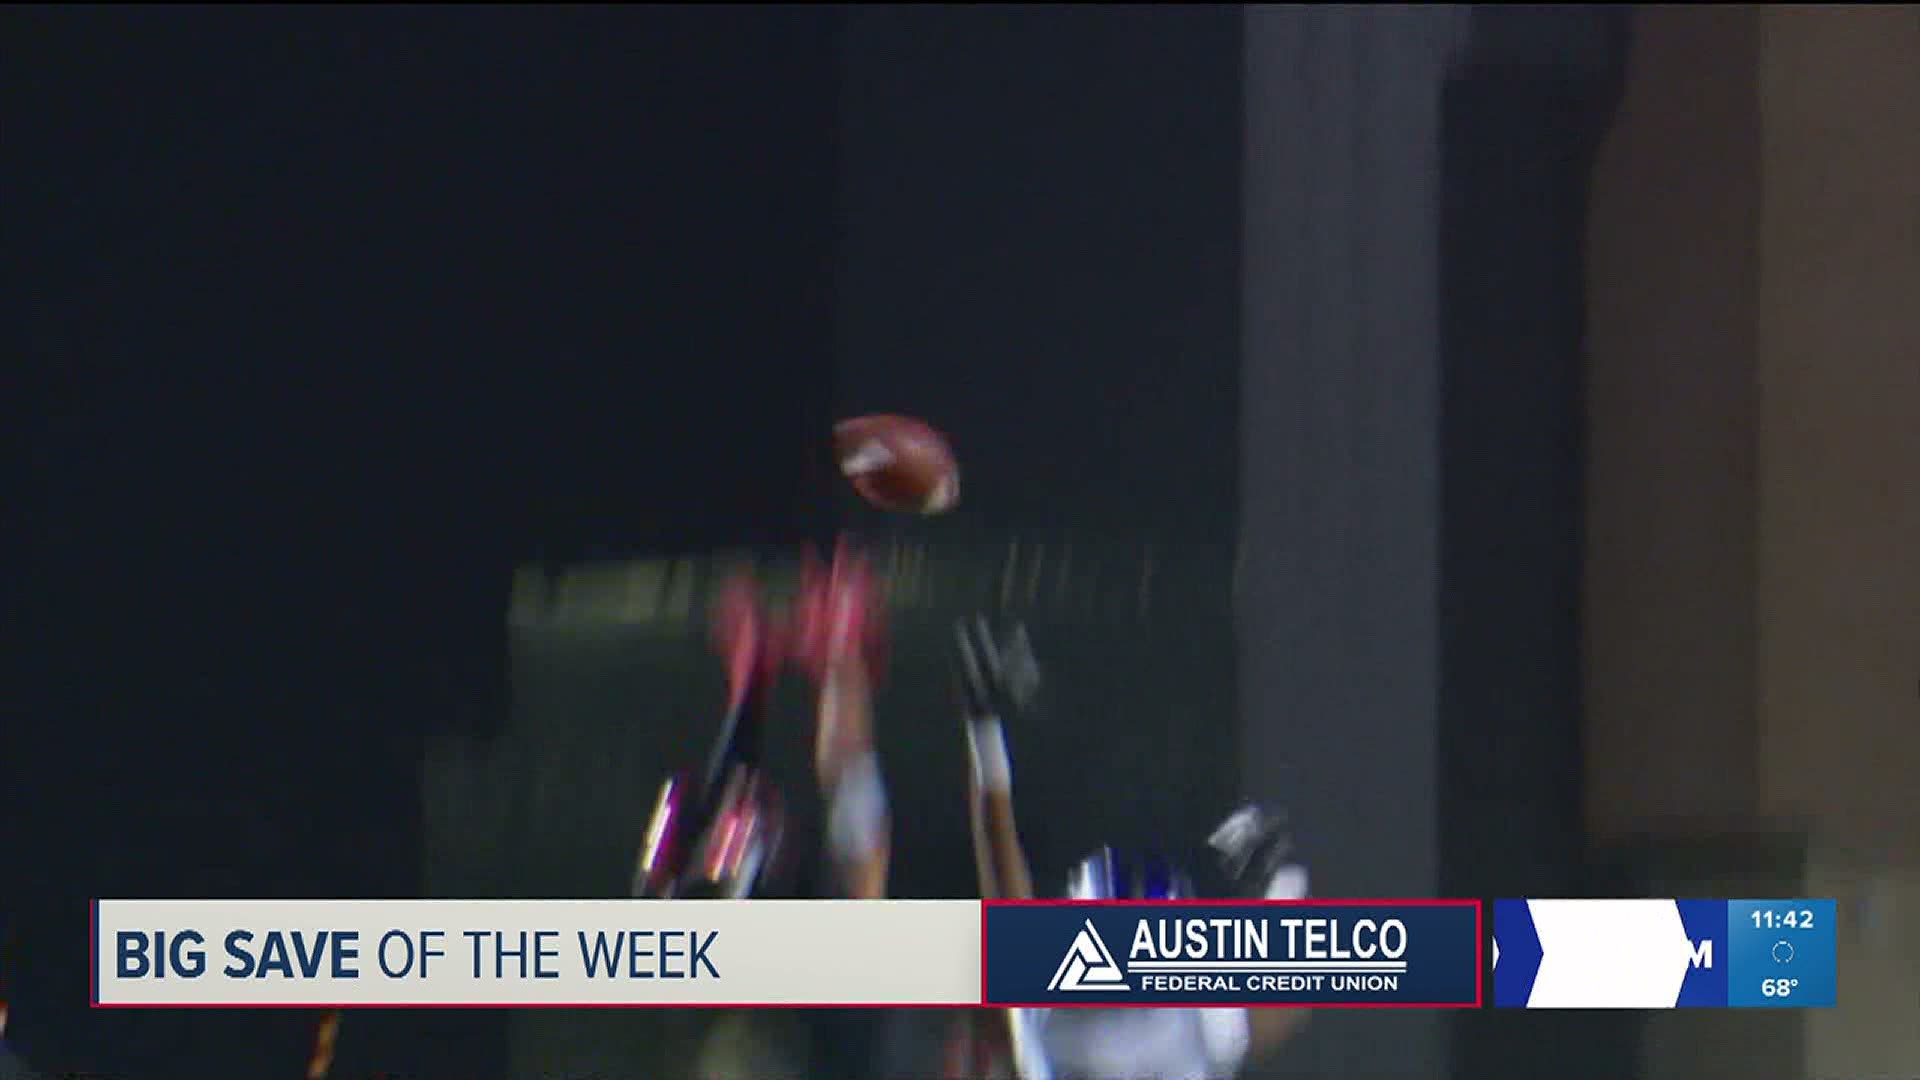 Vote on the KVUE Big Save of the Week here!